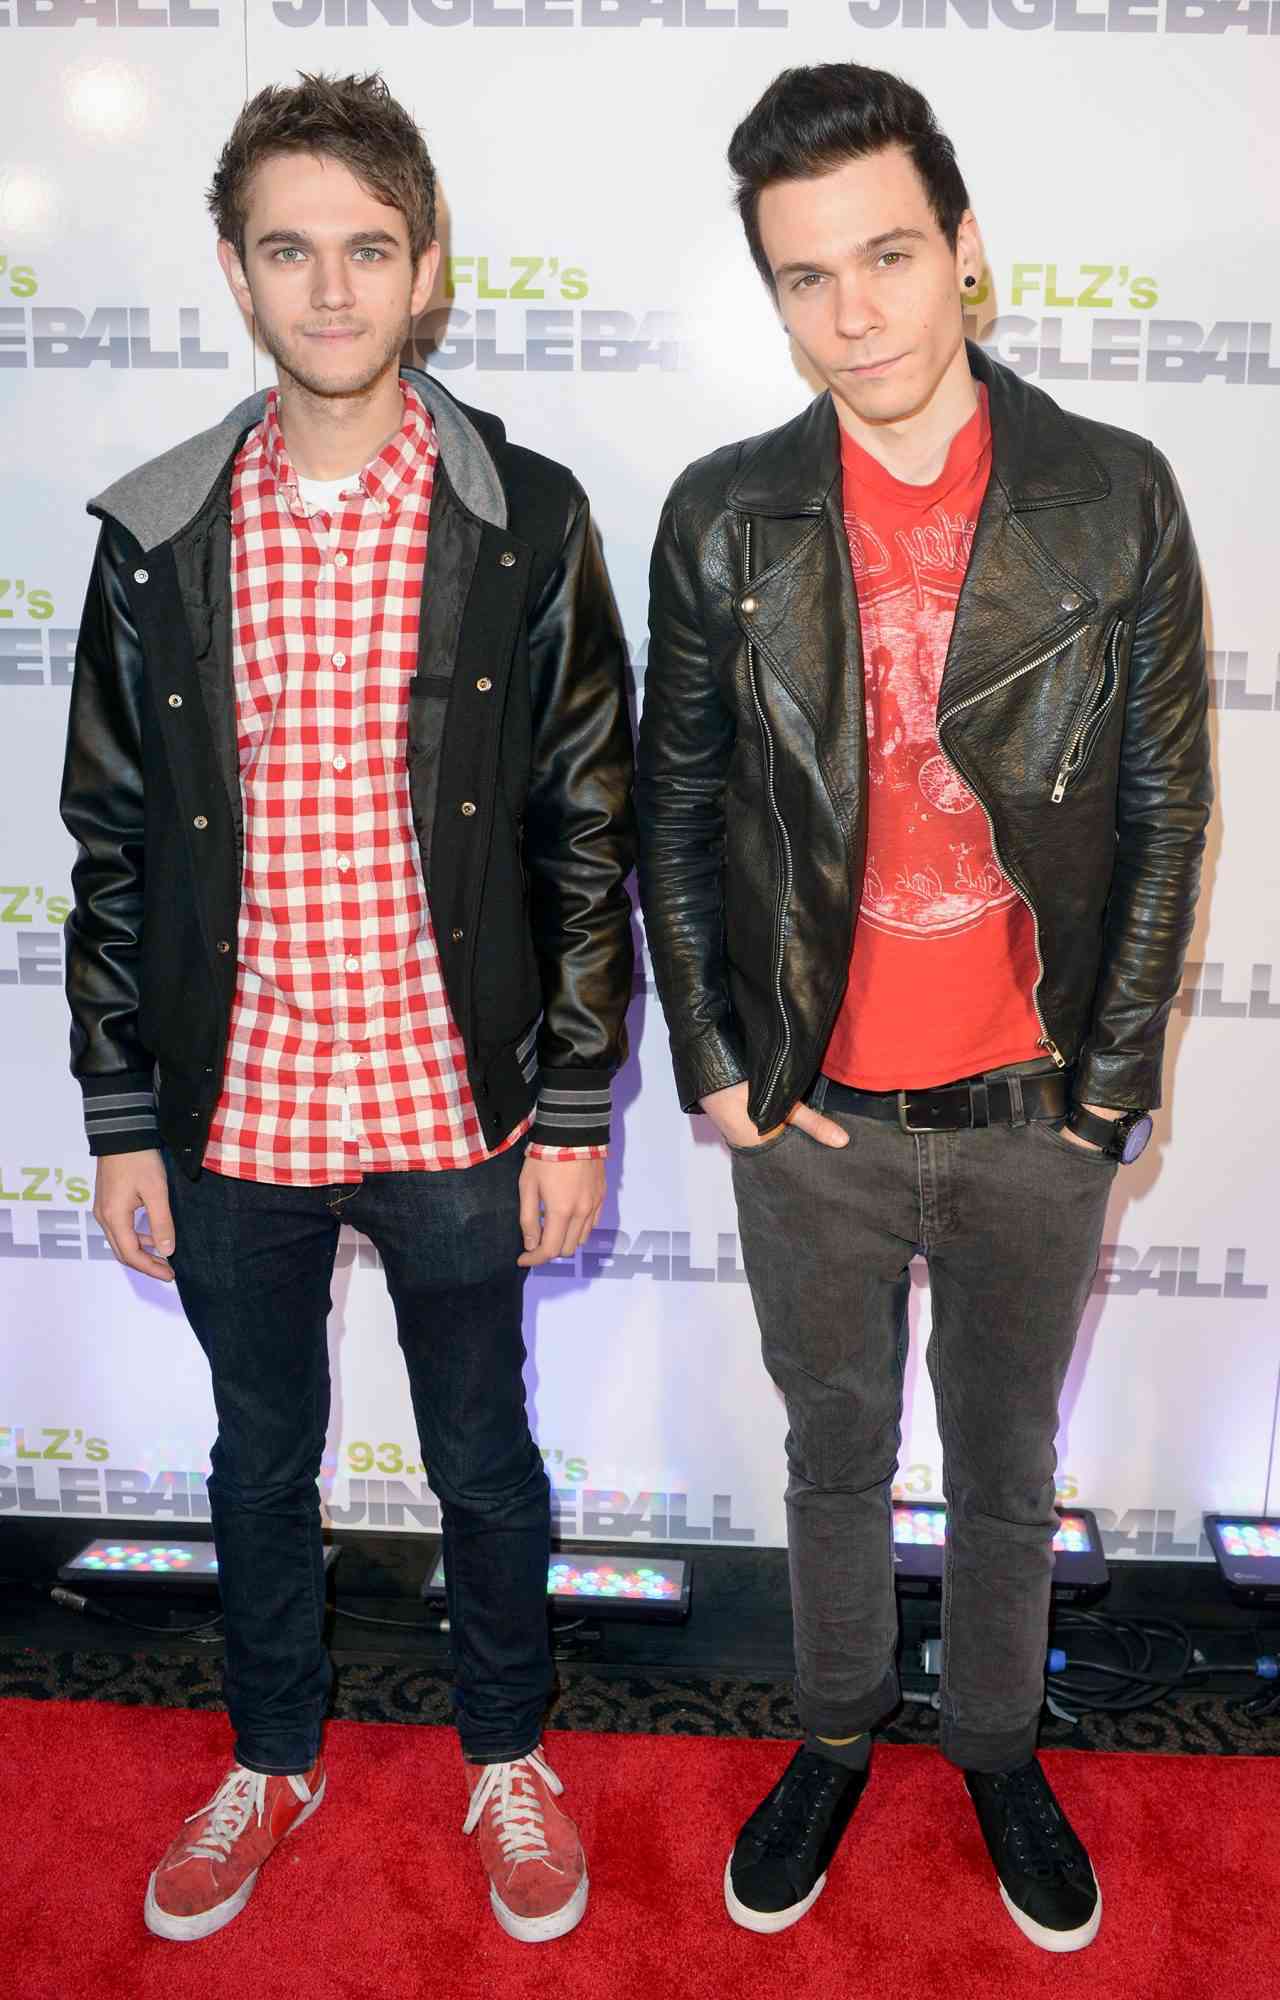 Music Producer Zedd and Matthew Koma attend 93.3 FLZ's Jingle Ball 2012 at Tampa Bay Times Forum on December 9, 2012 in Tampa, Florida. (Photo by Tim Boyles/Getty Images for Jingle Ball 2012)